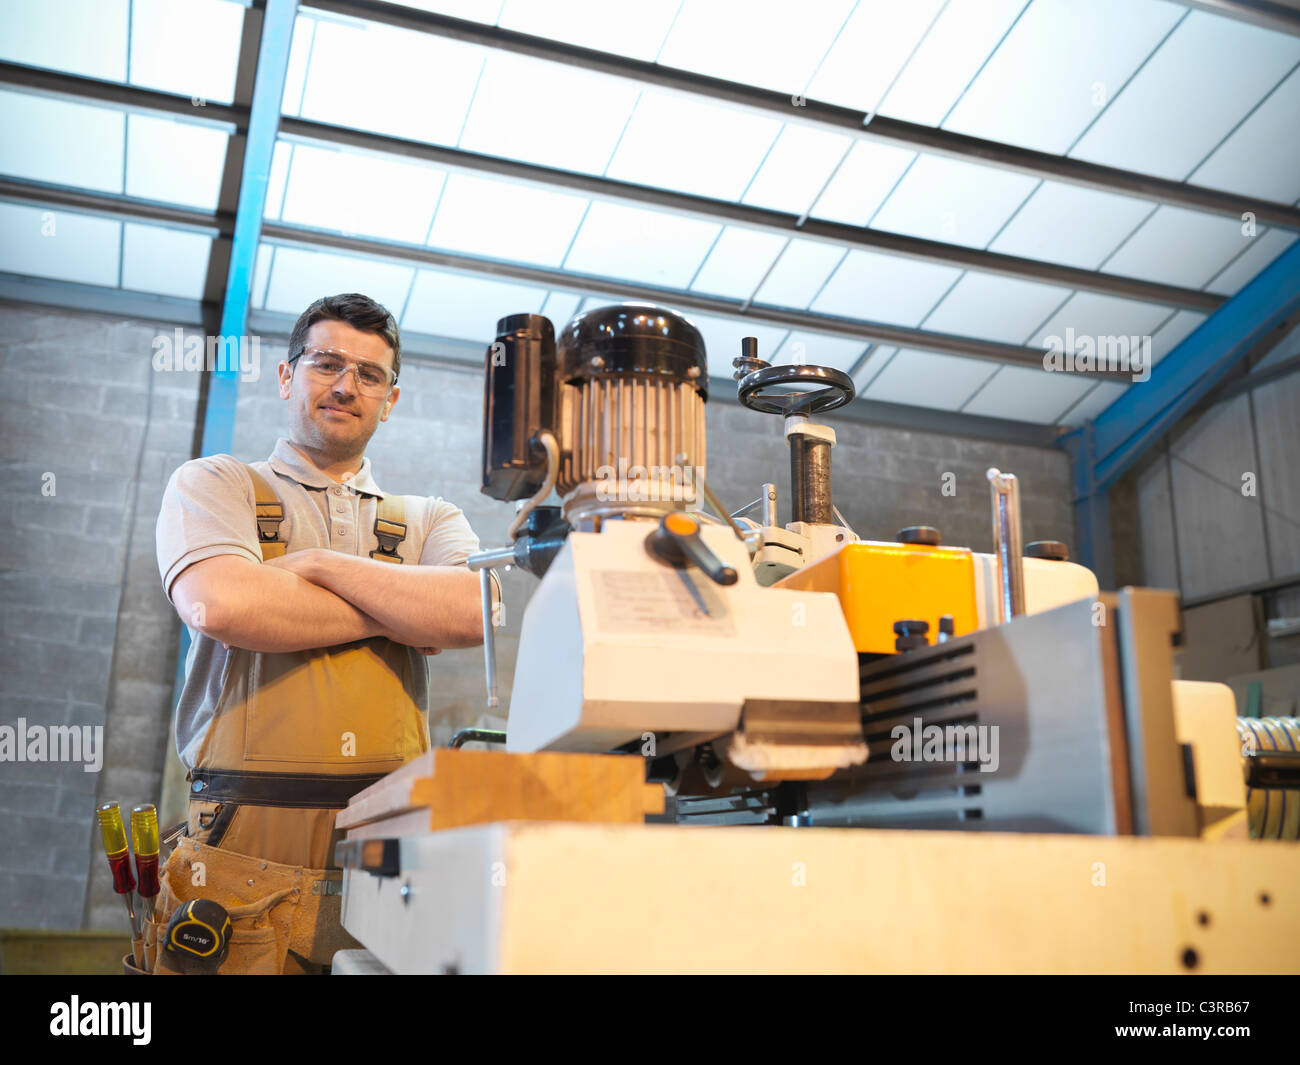 Woodworker with woodwork machine Stock Photo